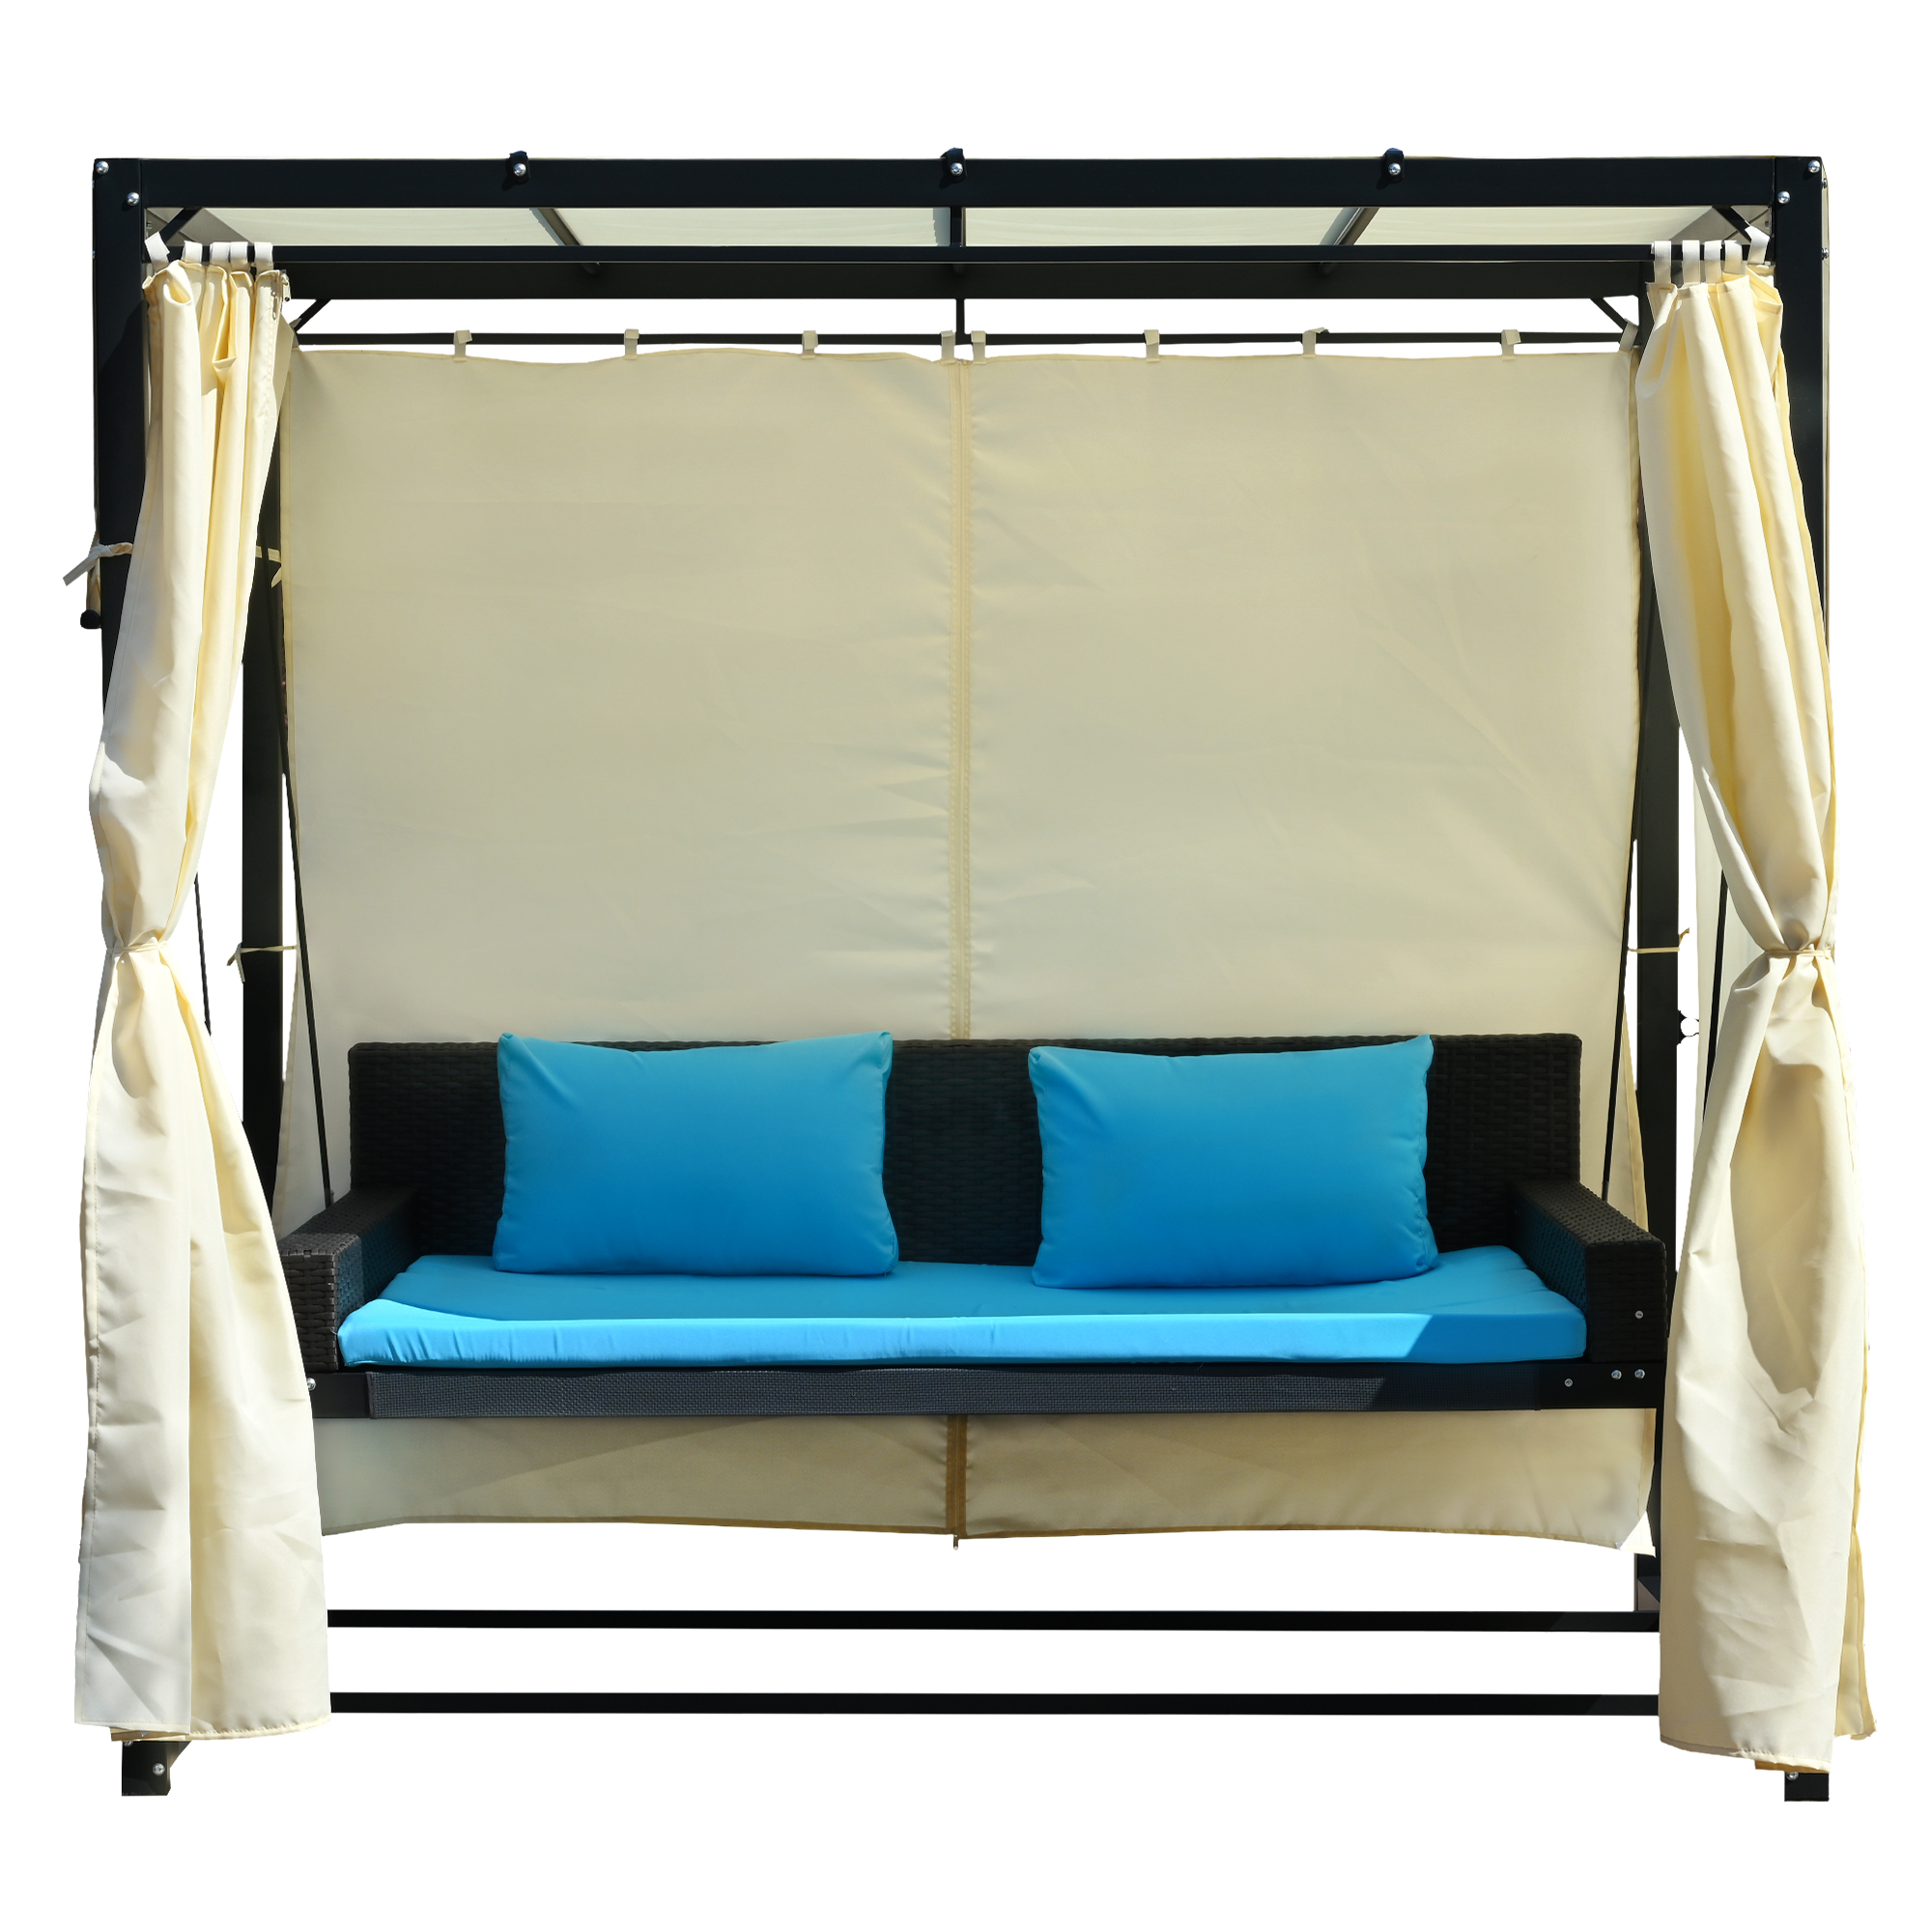 [VIDEO provided]2-3 People Outdoor Swing Bed,Adjustable Curtains,Suitable For Balconies, Gardens And Other Places - image 3 of 9